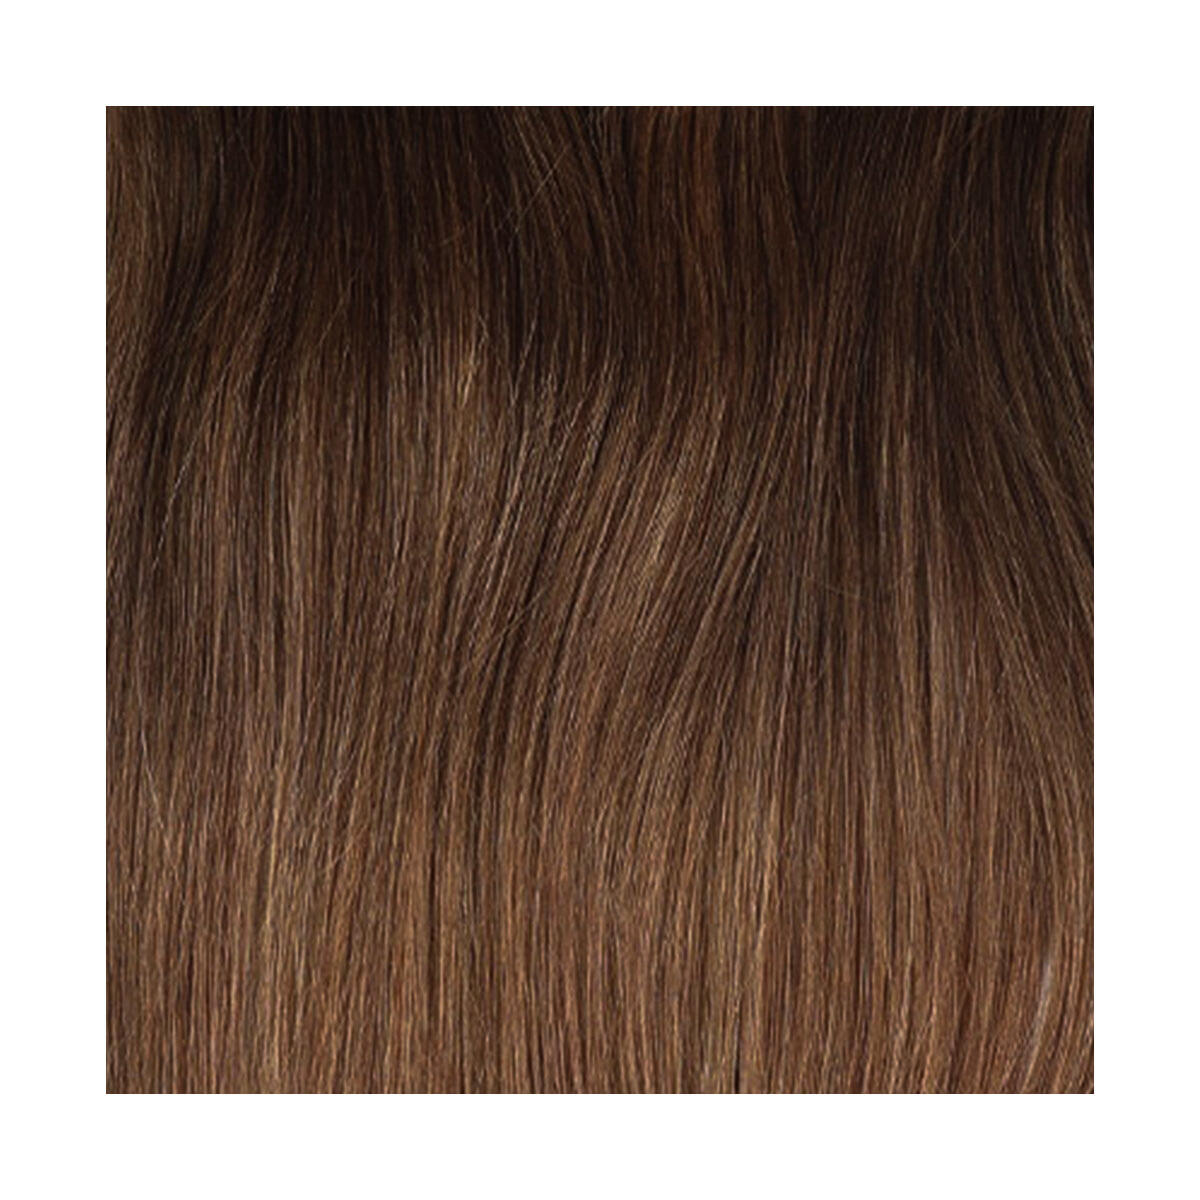 Colour Sample R2.3/5.0 Chocolate Brown Root 